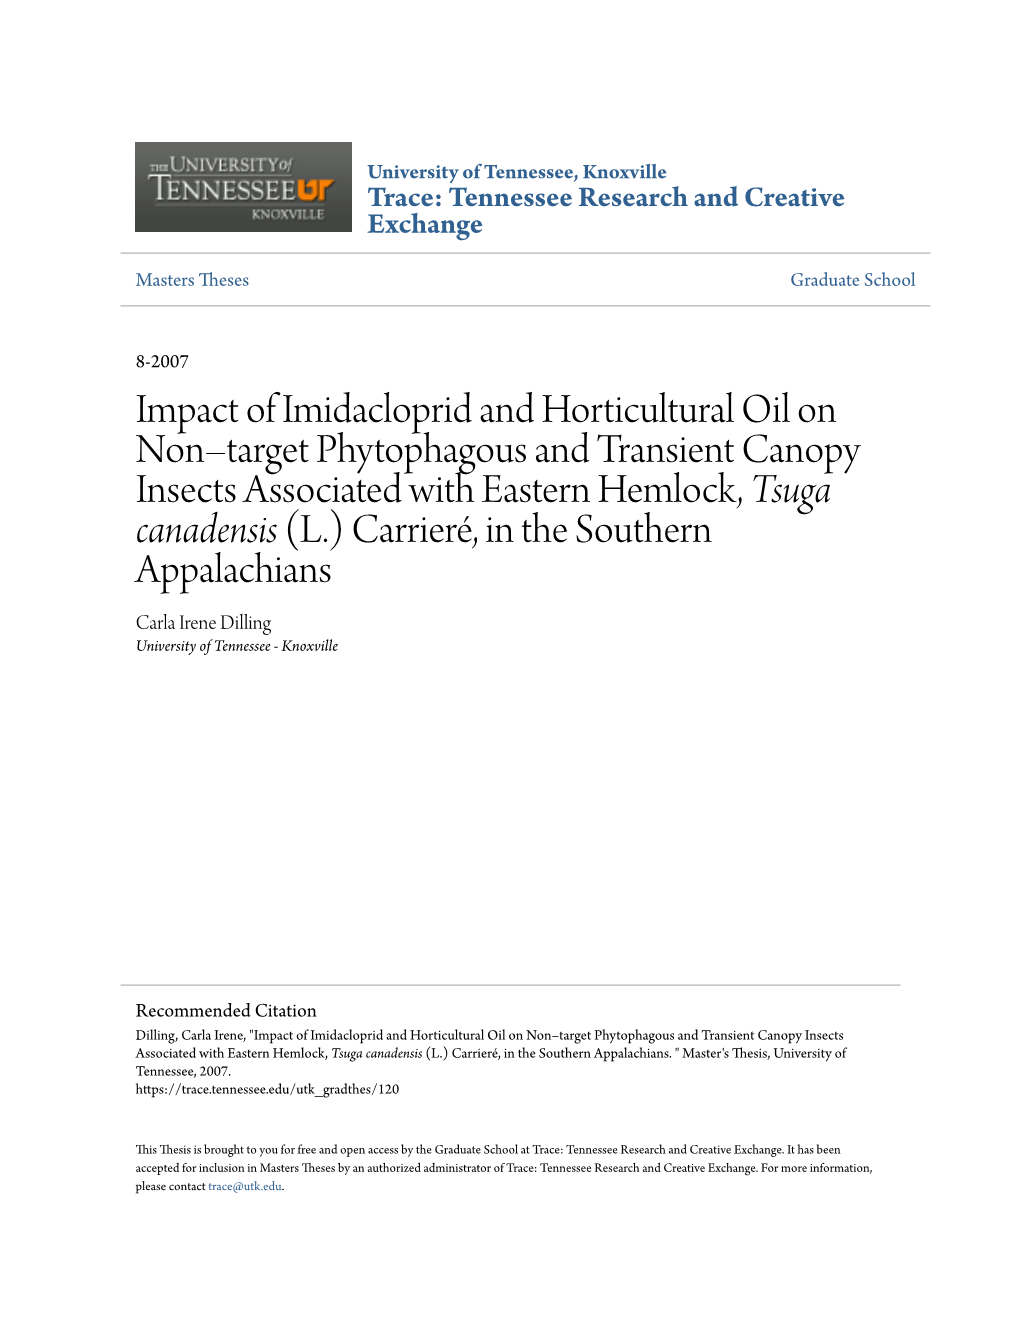 Impact of Imidacloprid and Horticultural Oil on Nonâ